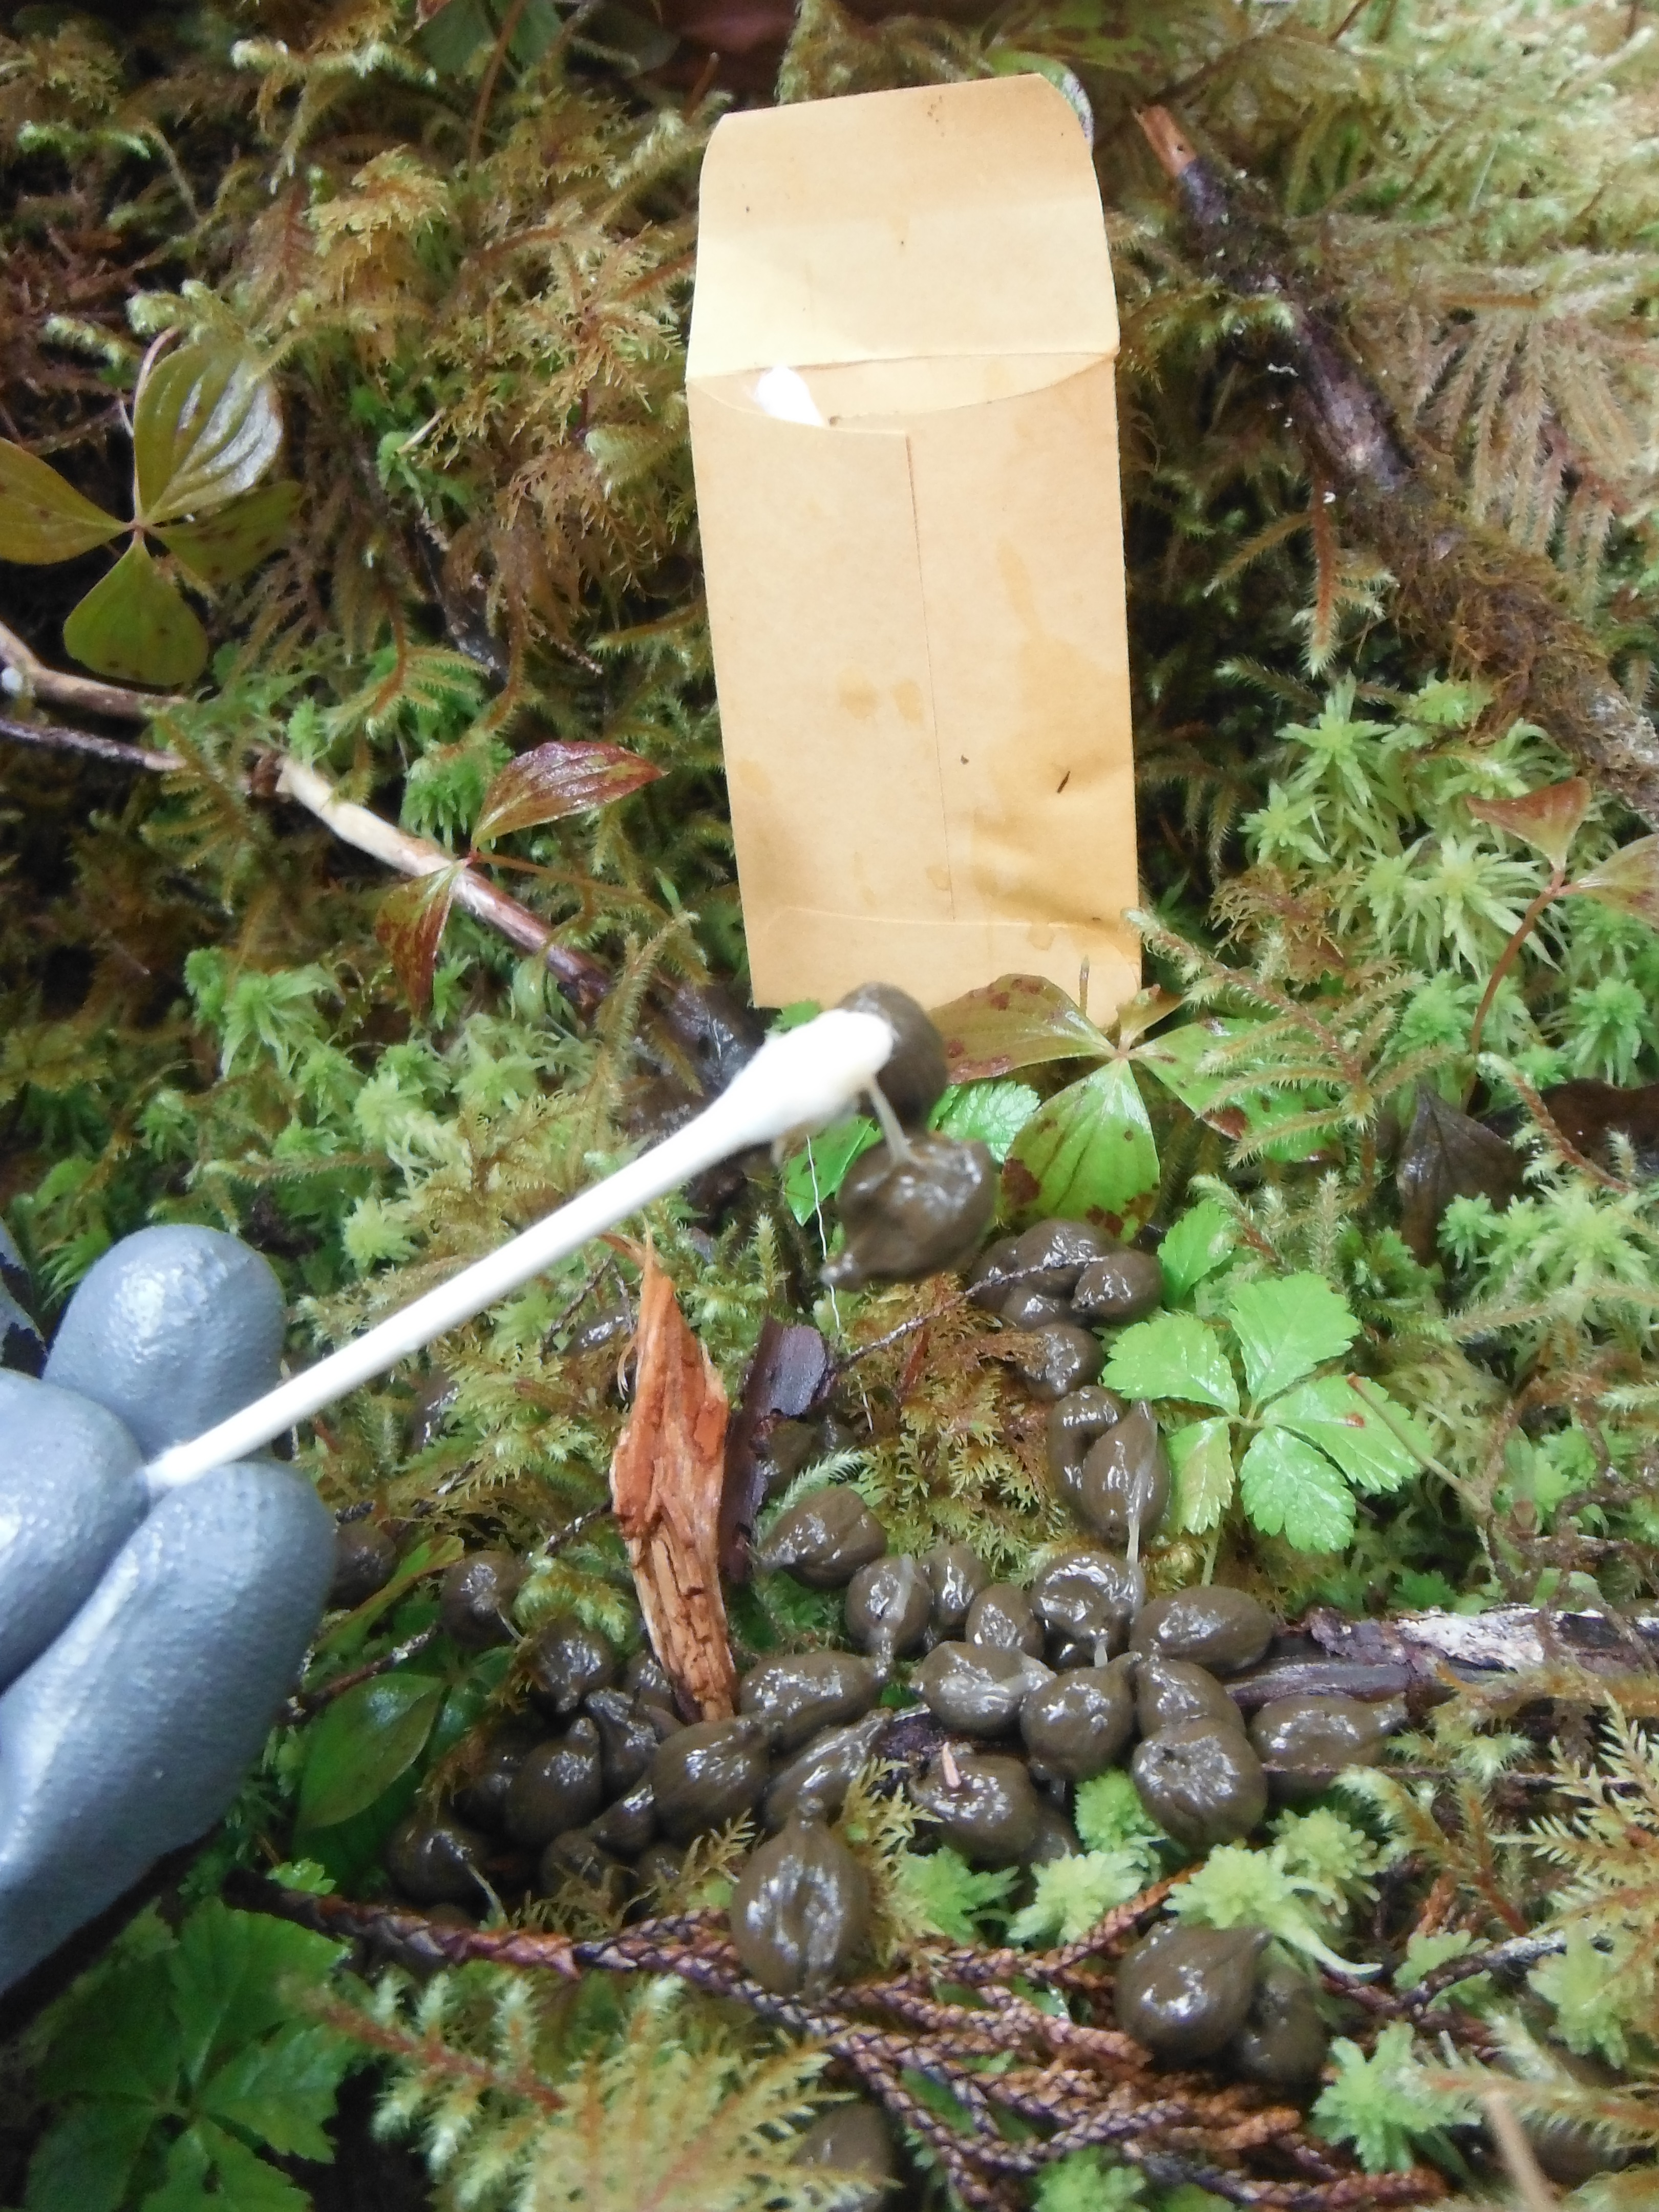 DNA from deer pellets are helping ADF&G monitor deer populations in Southeast Alaska. (Photo courtesy of Alaska Department of Fish and Game)